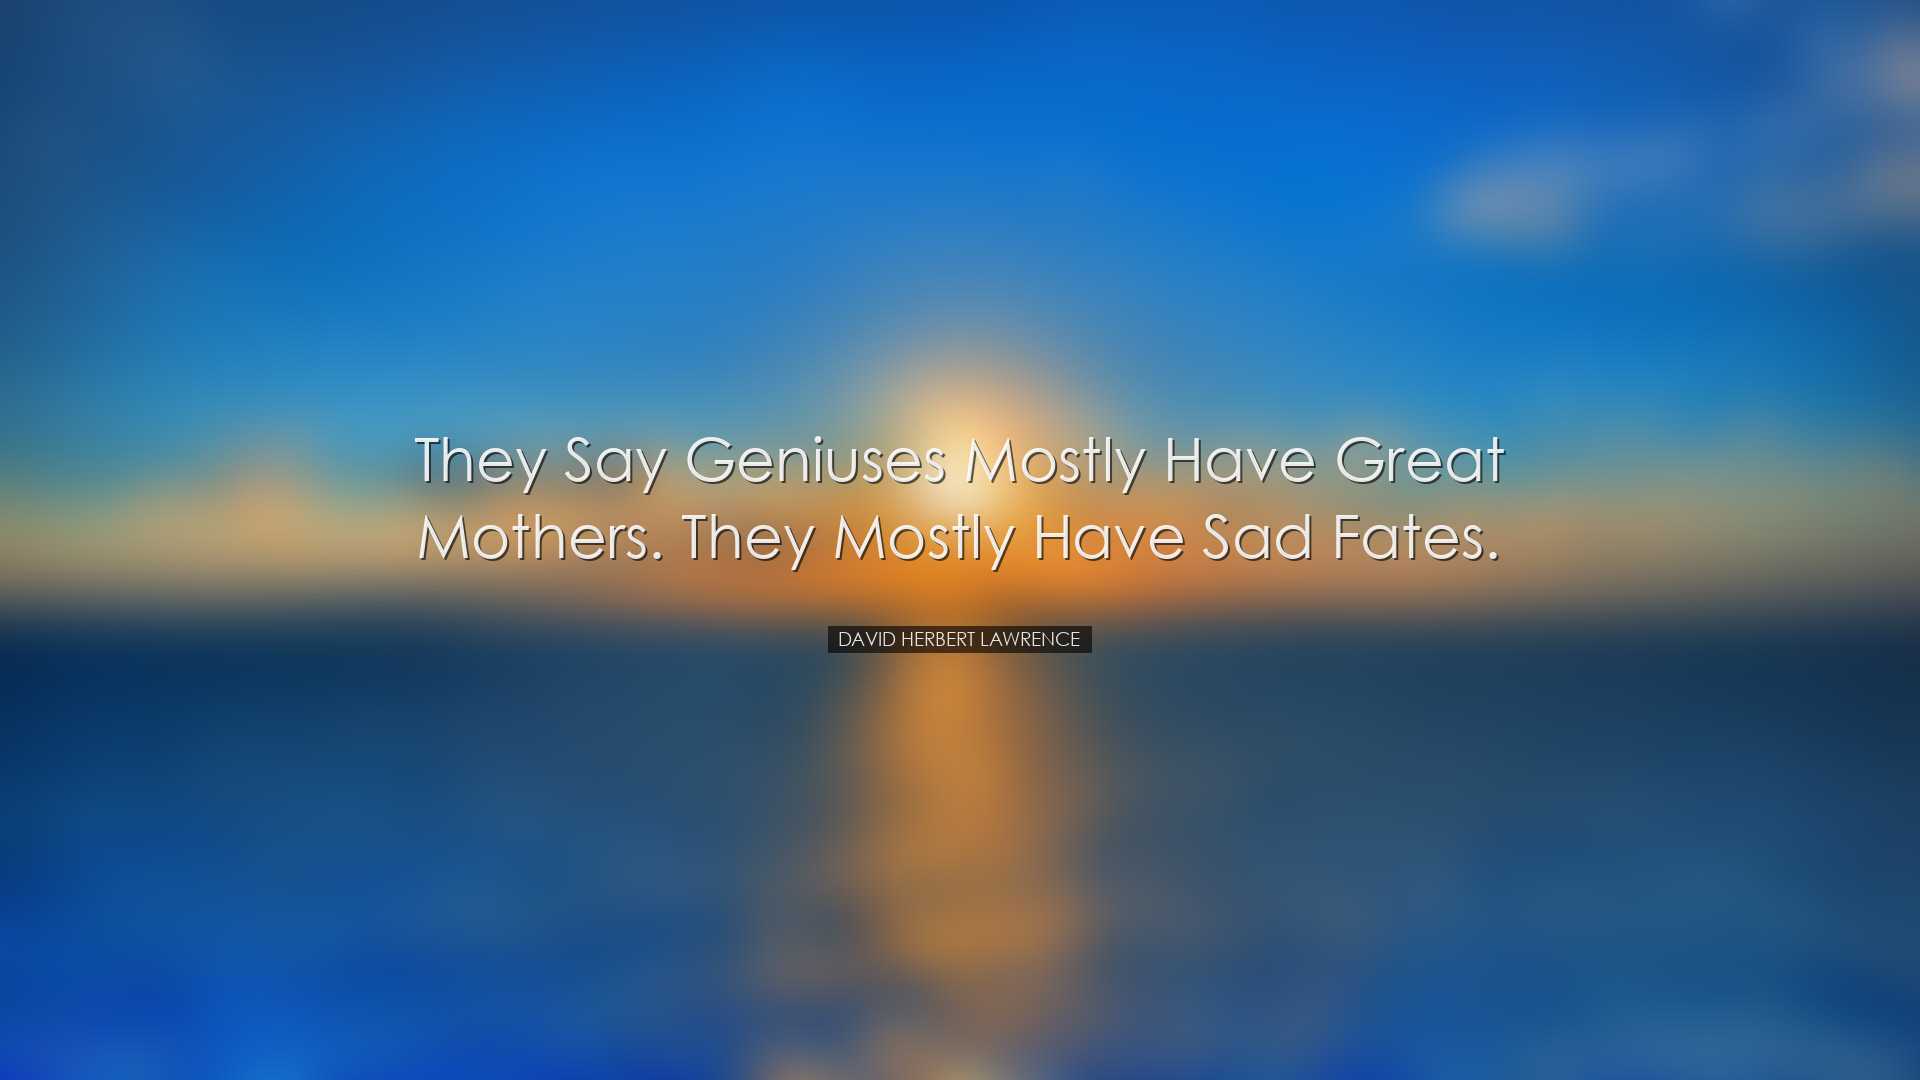 They say geniuses mostly have great mothers. They mostly have sad